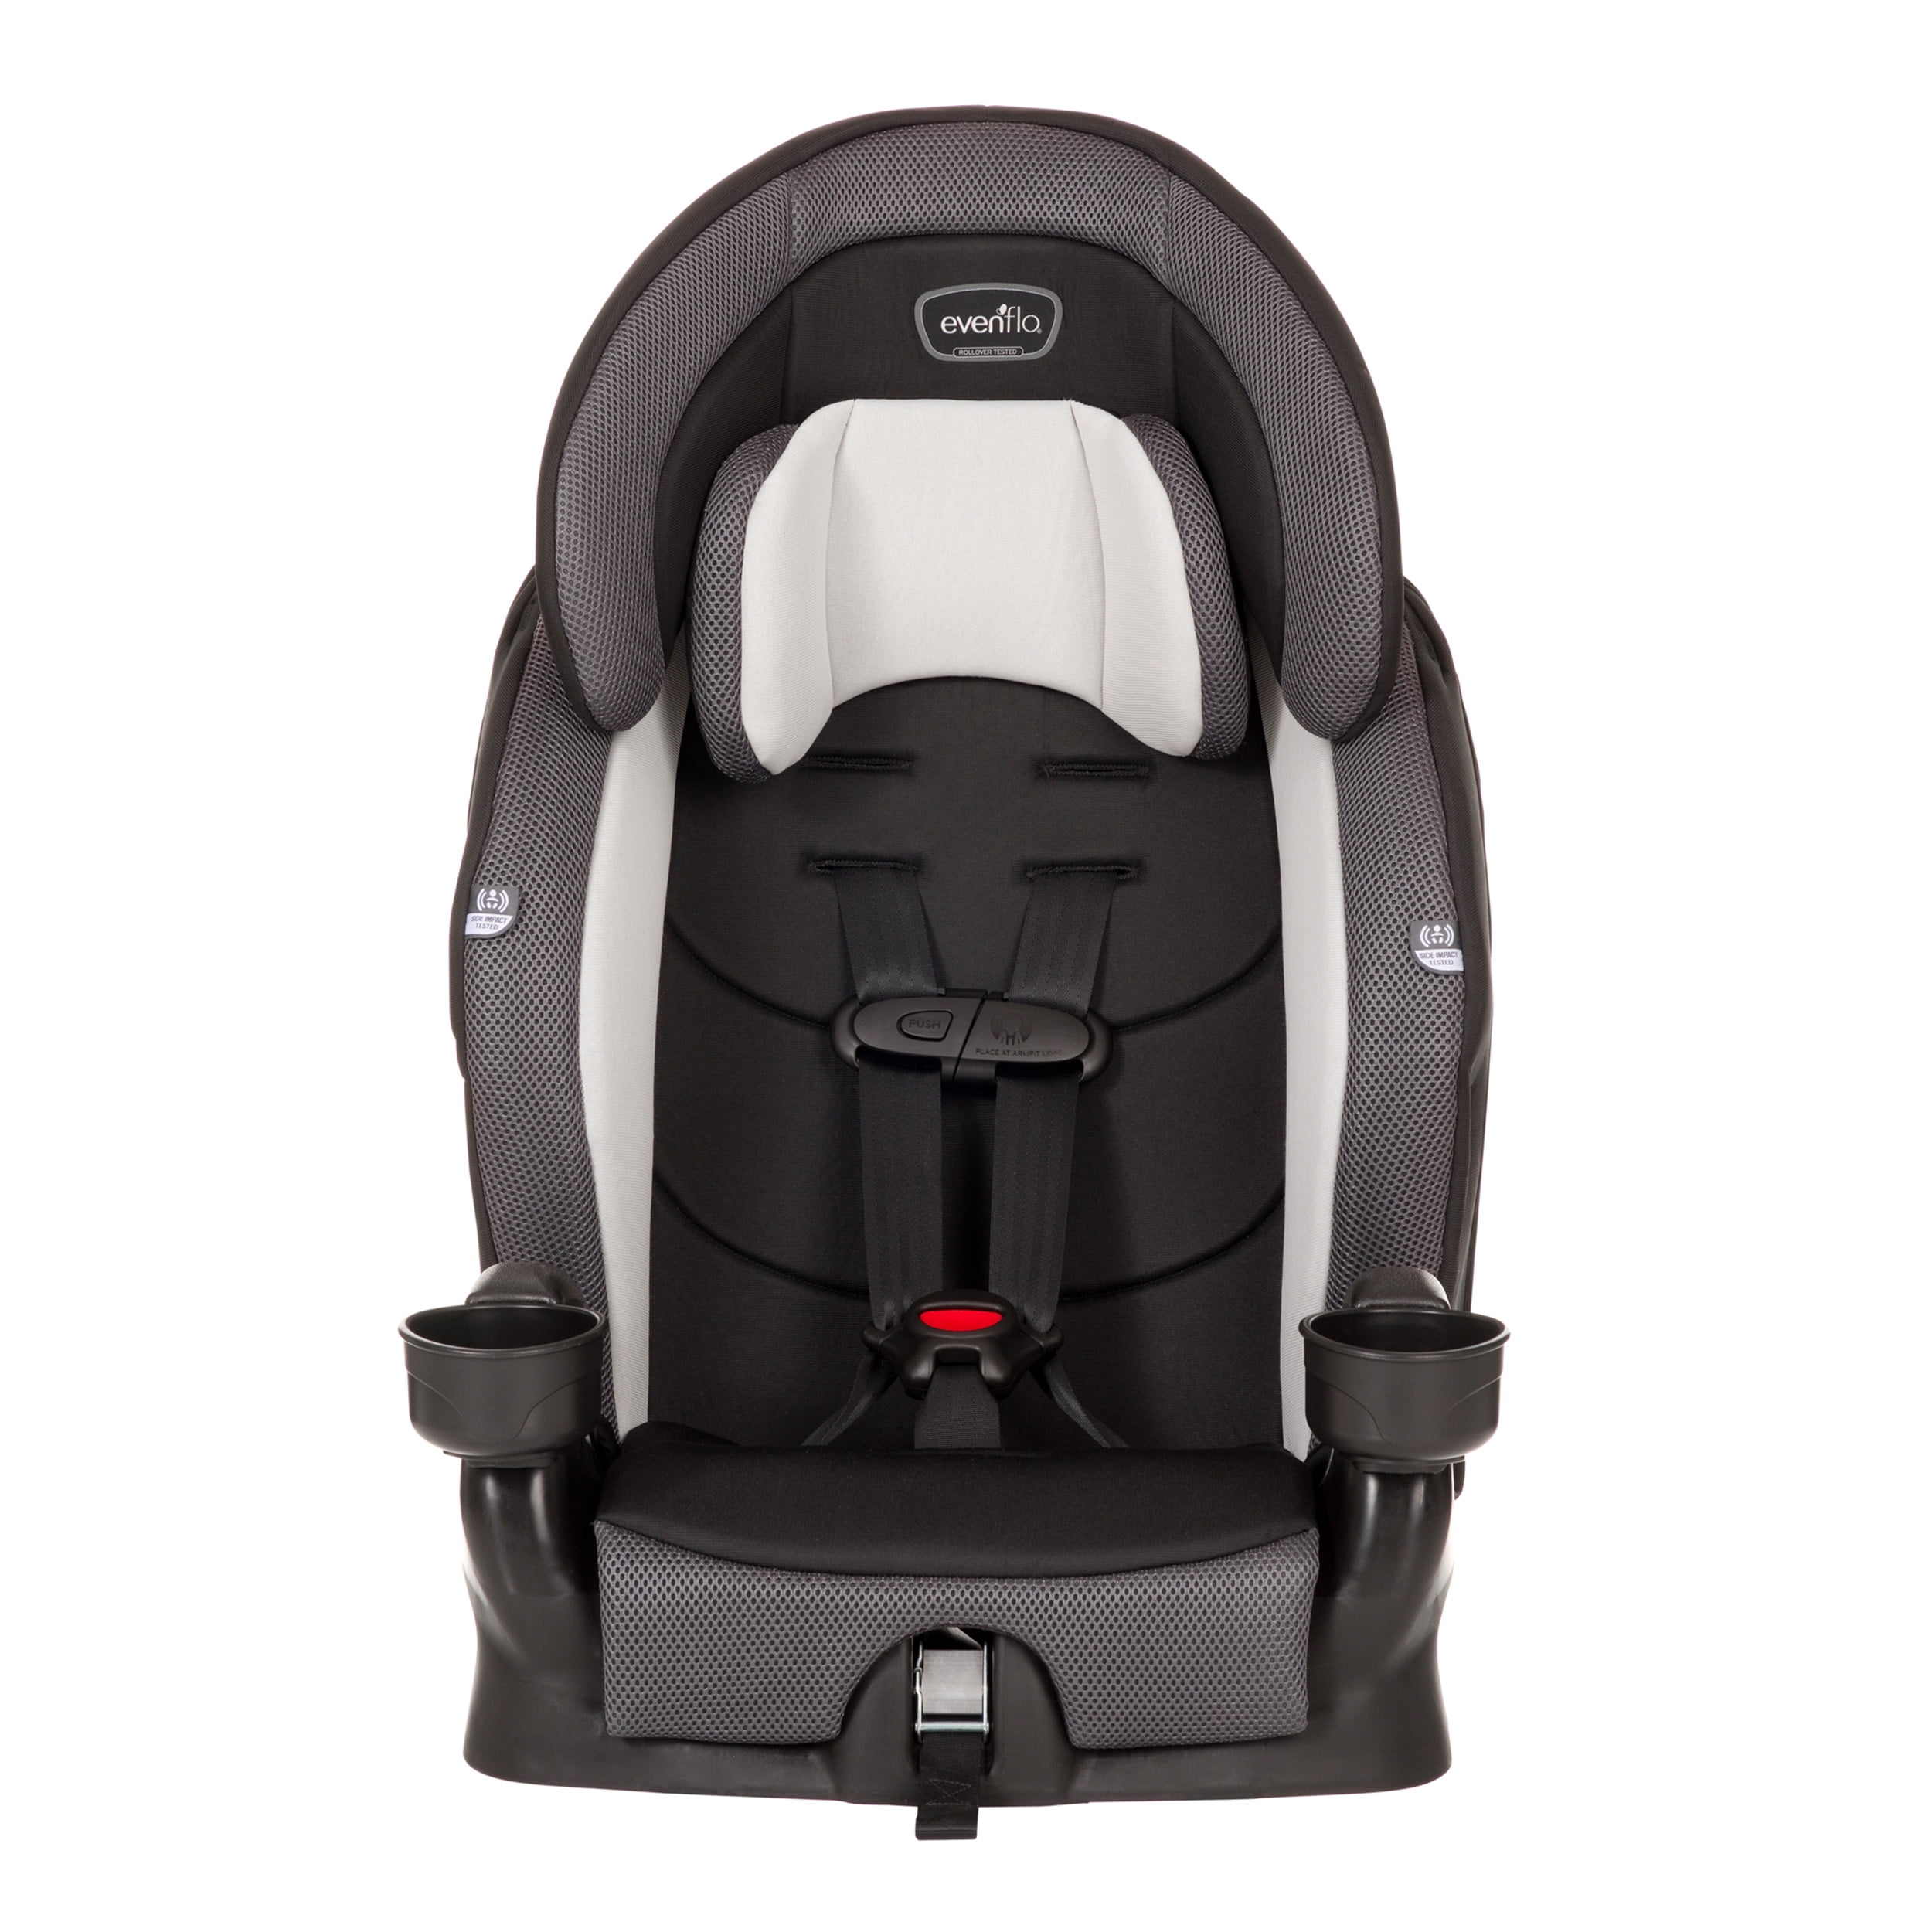 Evenflo Chase Plus 2-in-1 Booster Toddler Car Seat (Black or Pink) $59 + Free Shipping